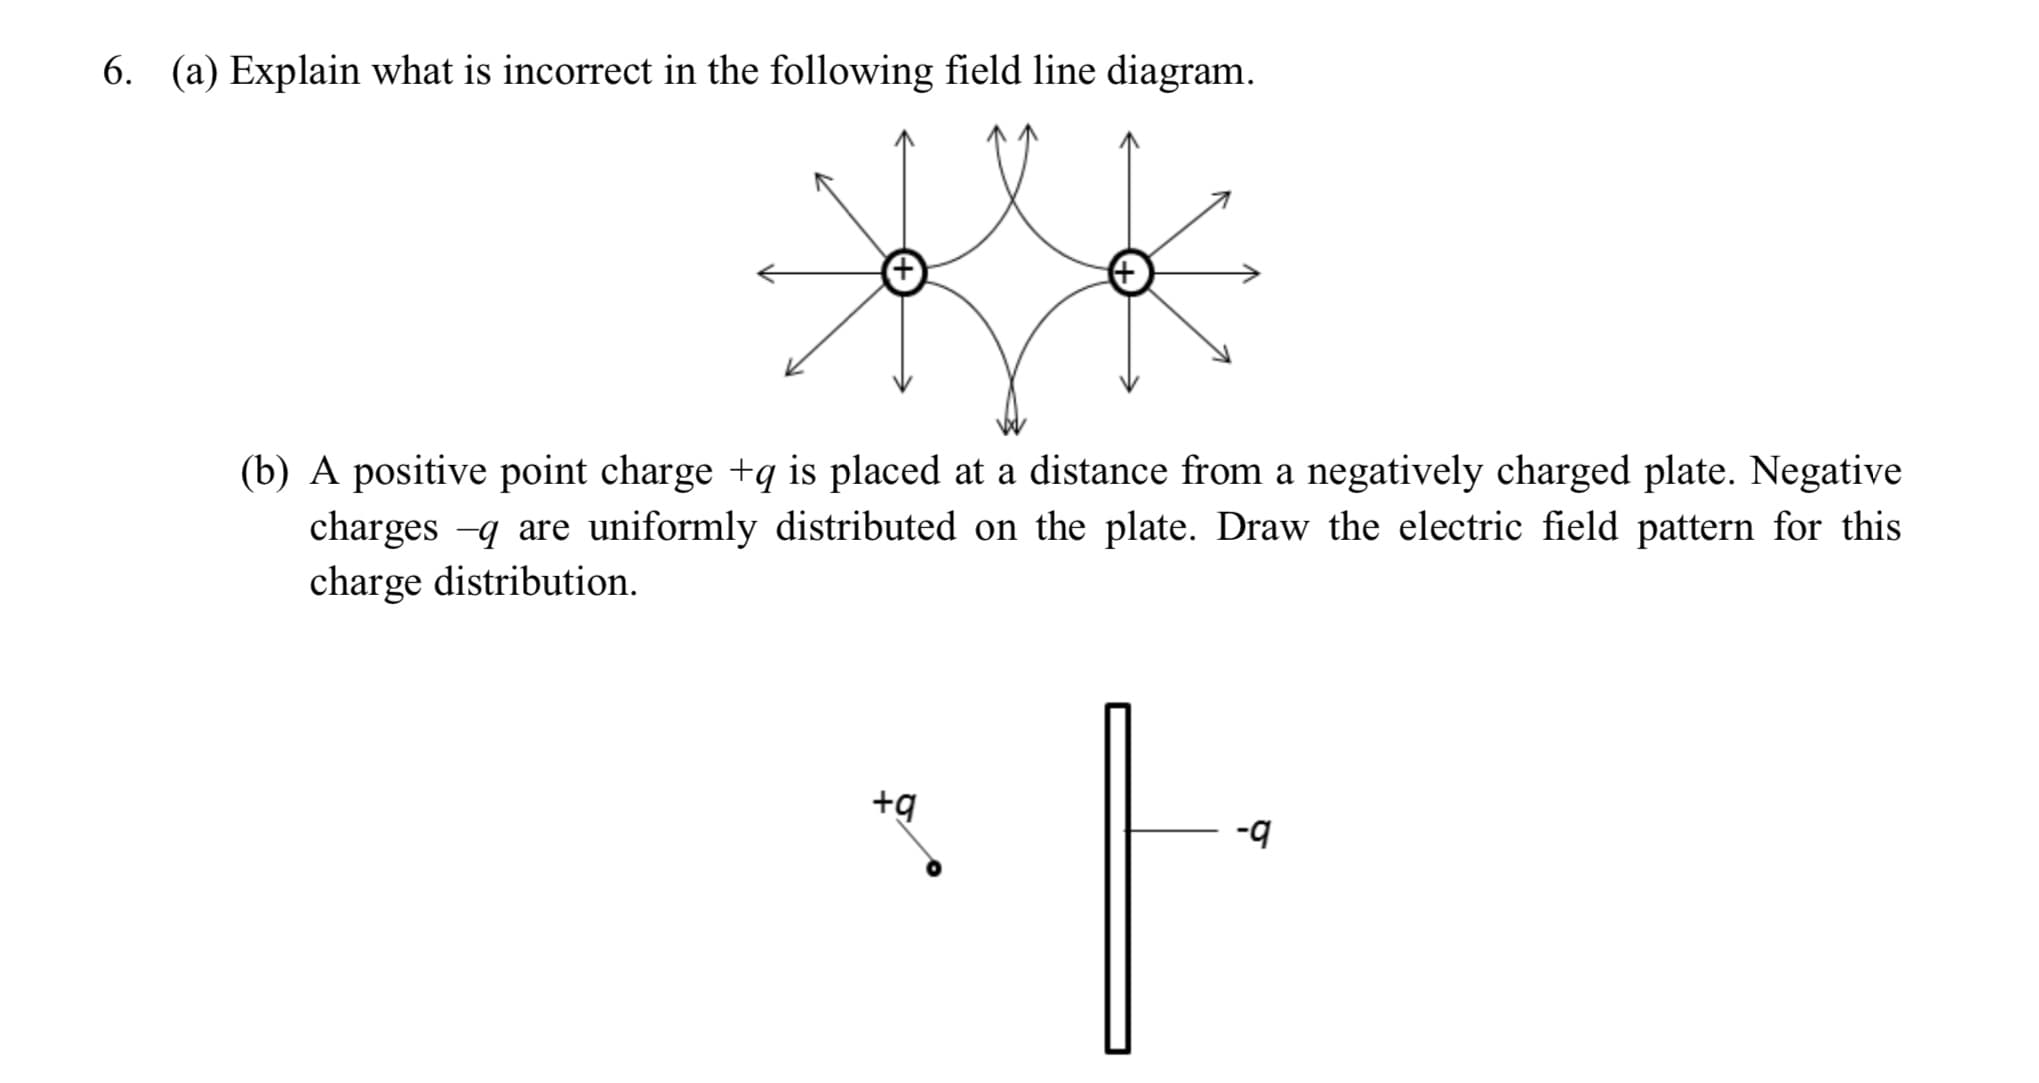 6. (a) Explain what is incorrect in the following field line diagram.
(b) A positive point charge +q is placed at a distance from a negatively charged plate. Negative
charges -q are uniformly distributed on the plate. Draw the electric field pattern for this
charge distribution.
+g
b-
